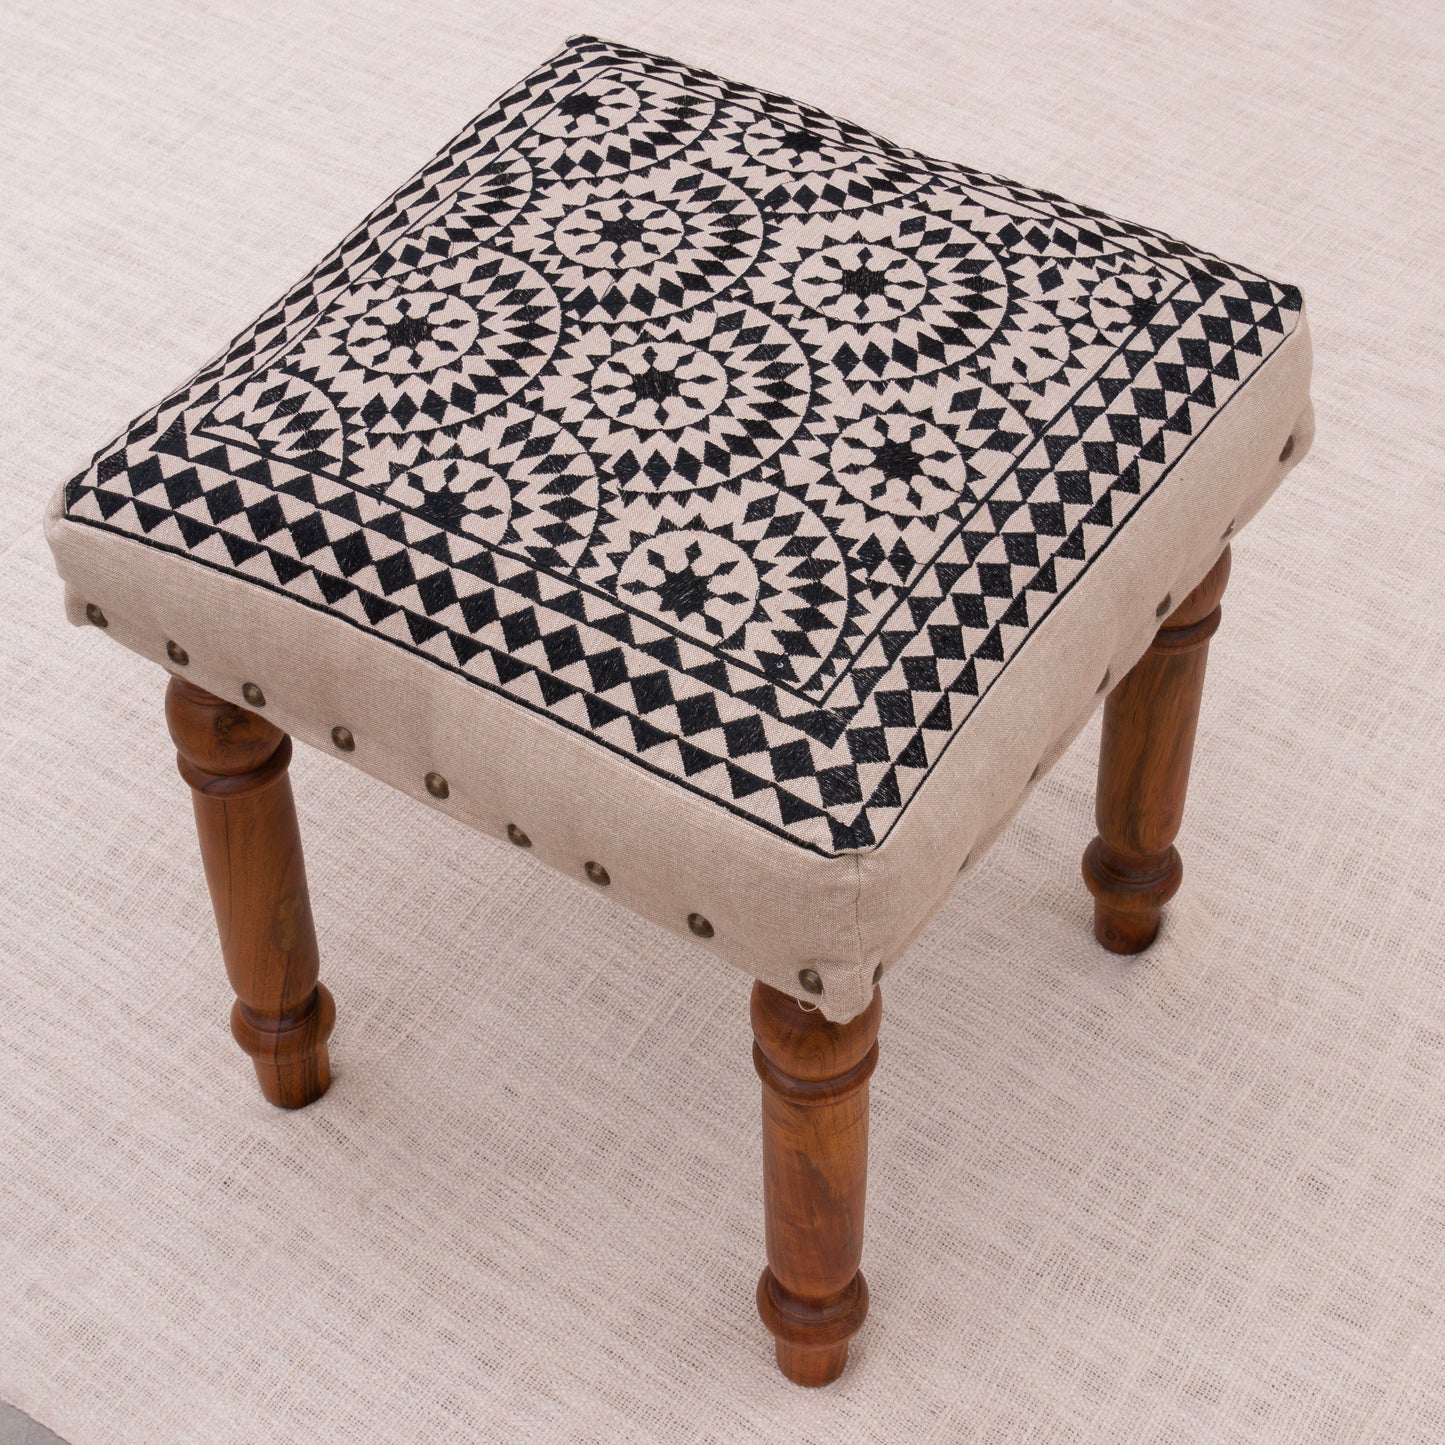 Carbon Cube Footstool - I